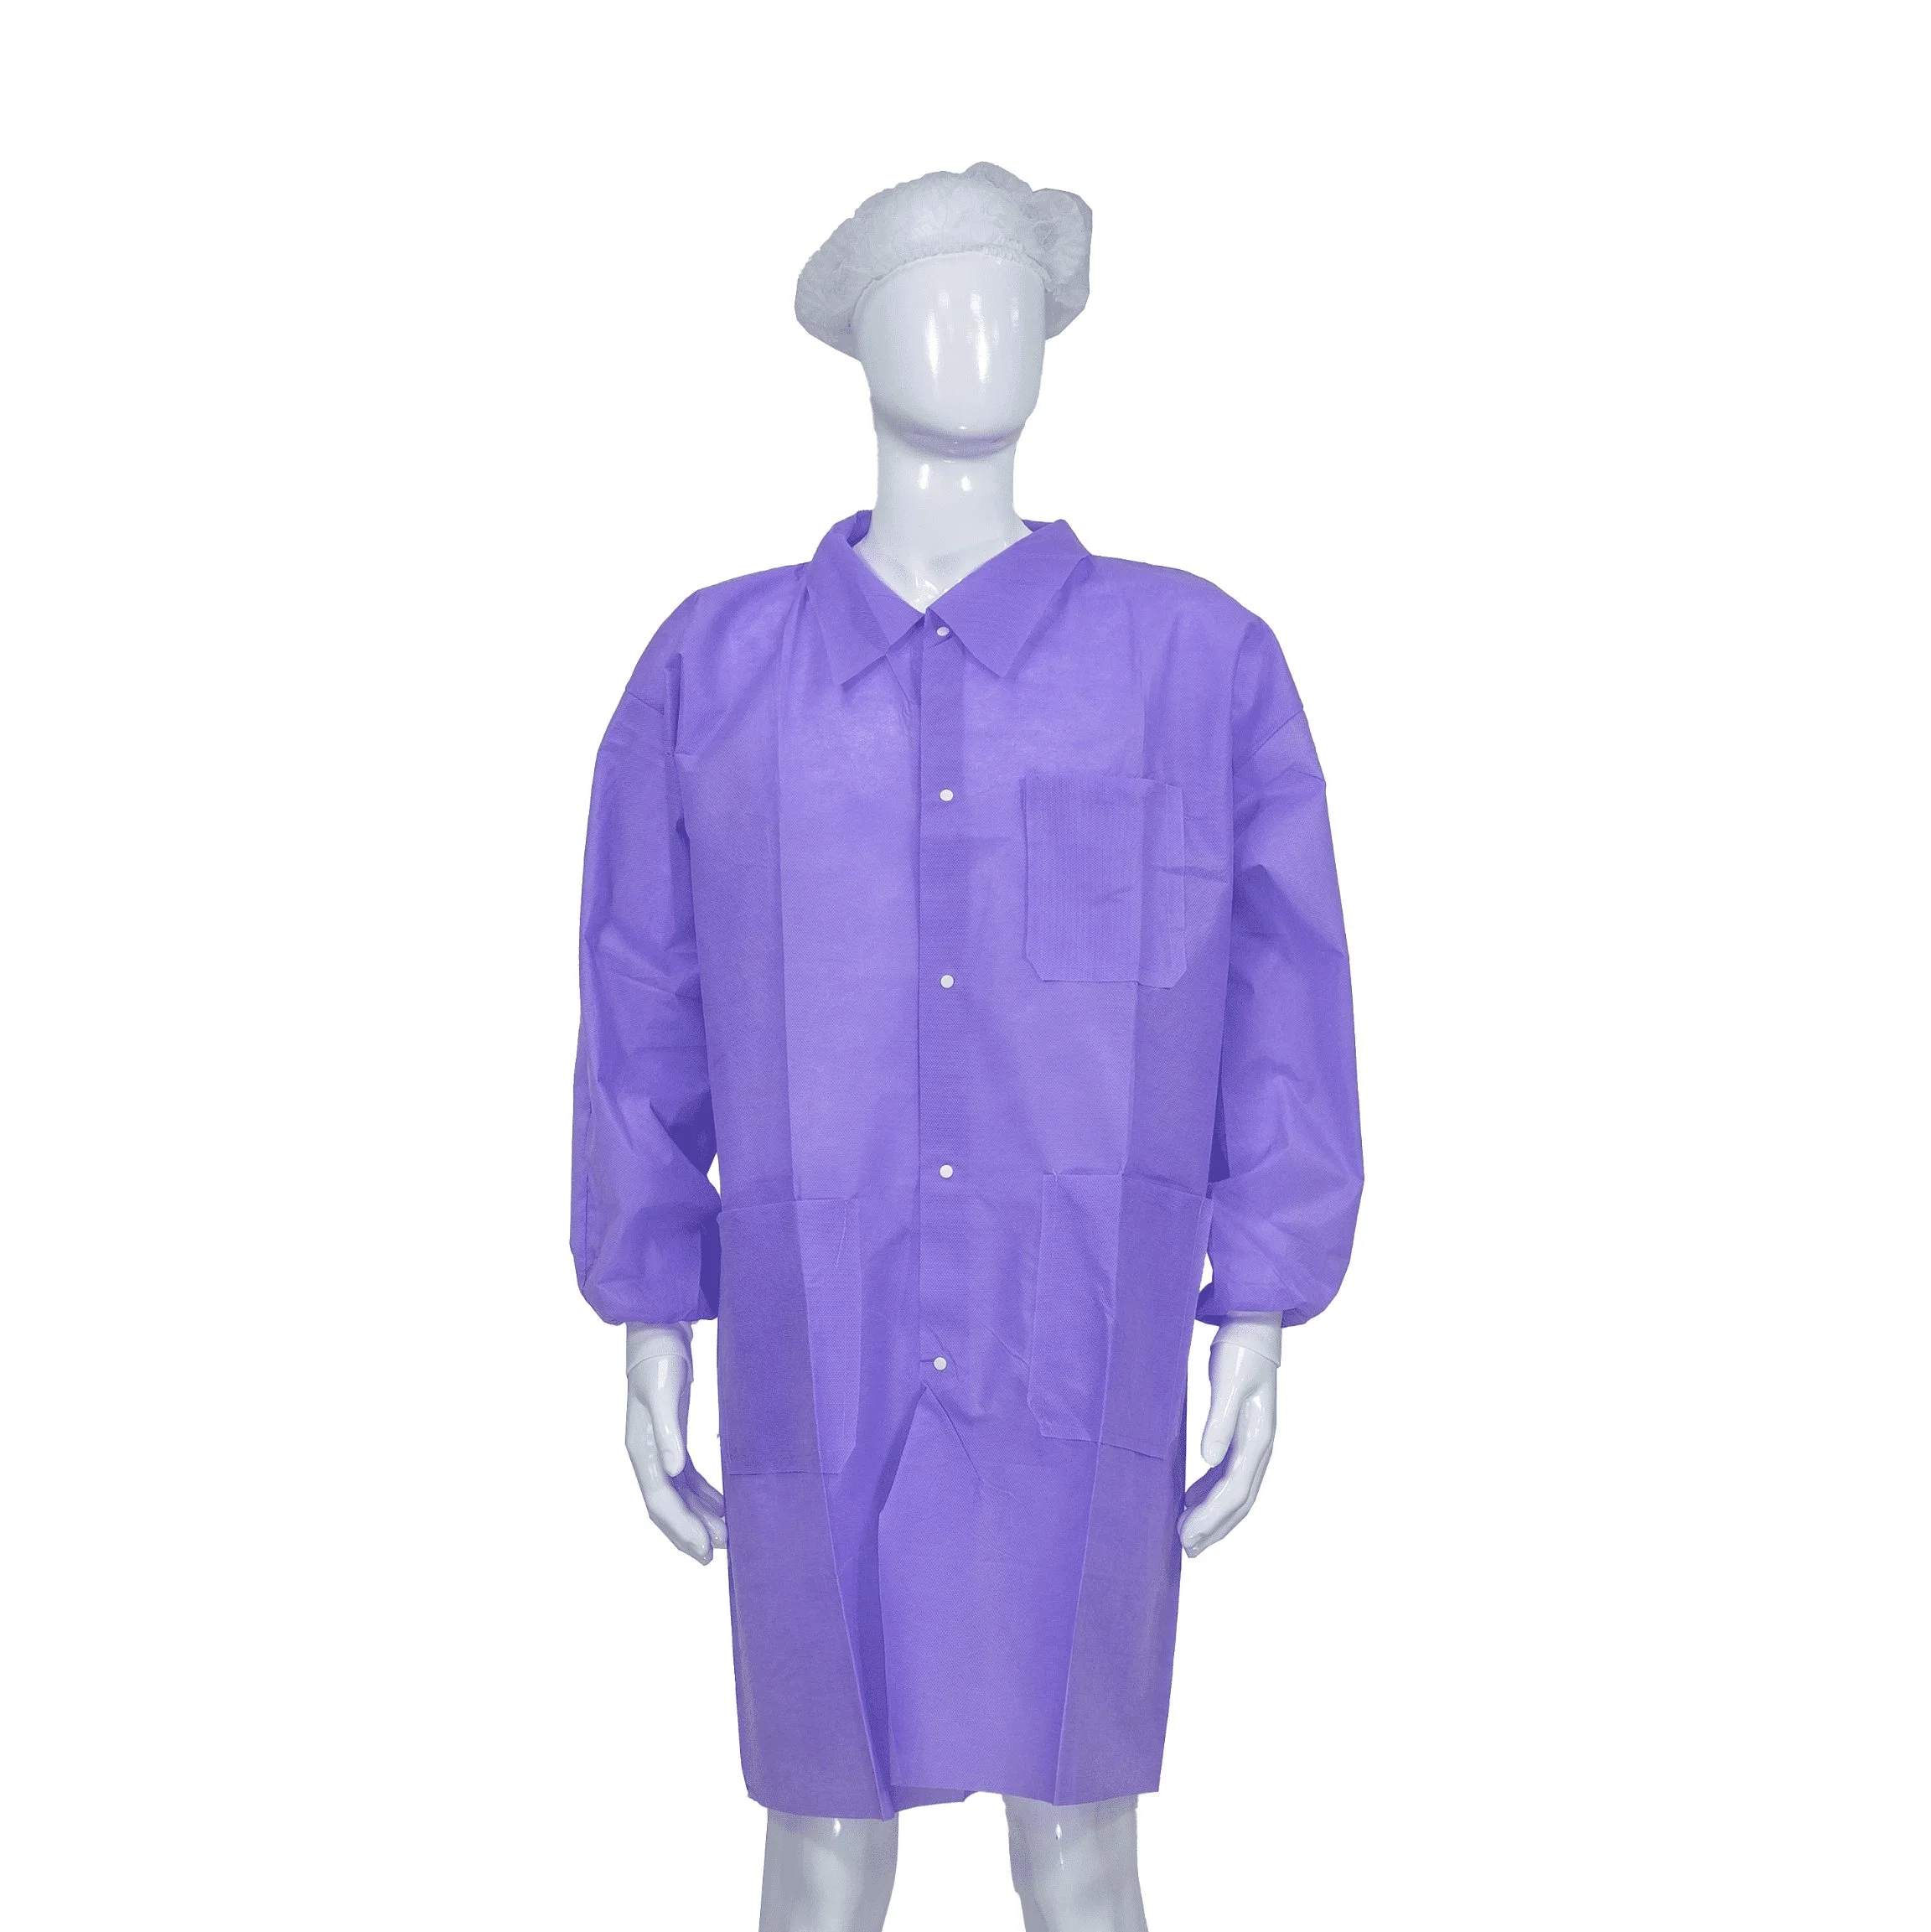 Snaps Closure Disposable PP/SMS Lab Coat Factory/Food Industry Durable Use Adult Size No-Reuse Work Clothes Long Sleeves Dust Coat